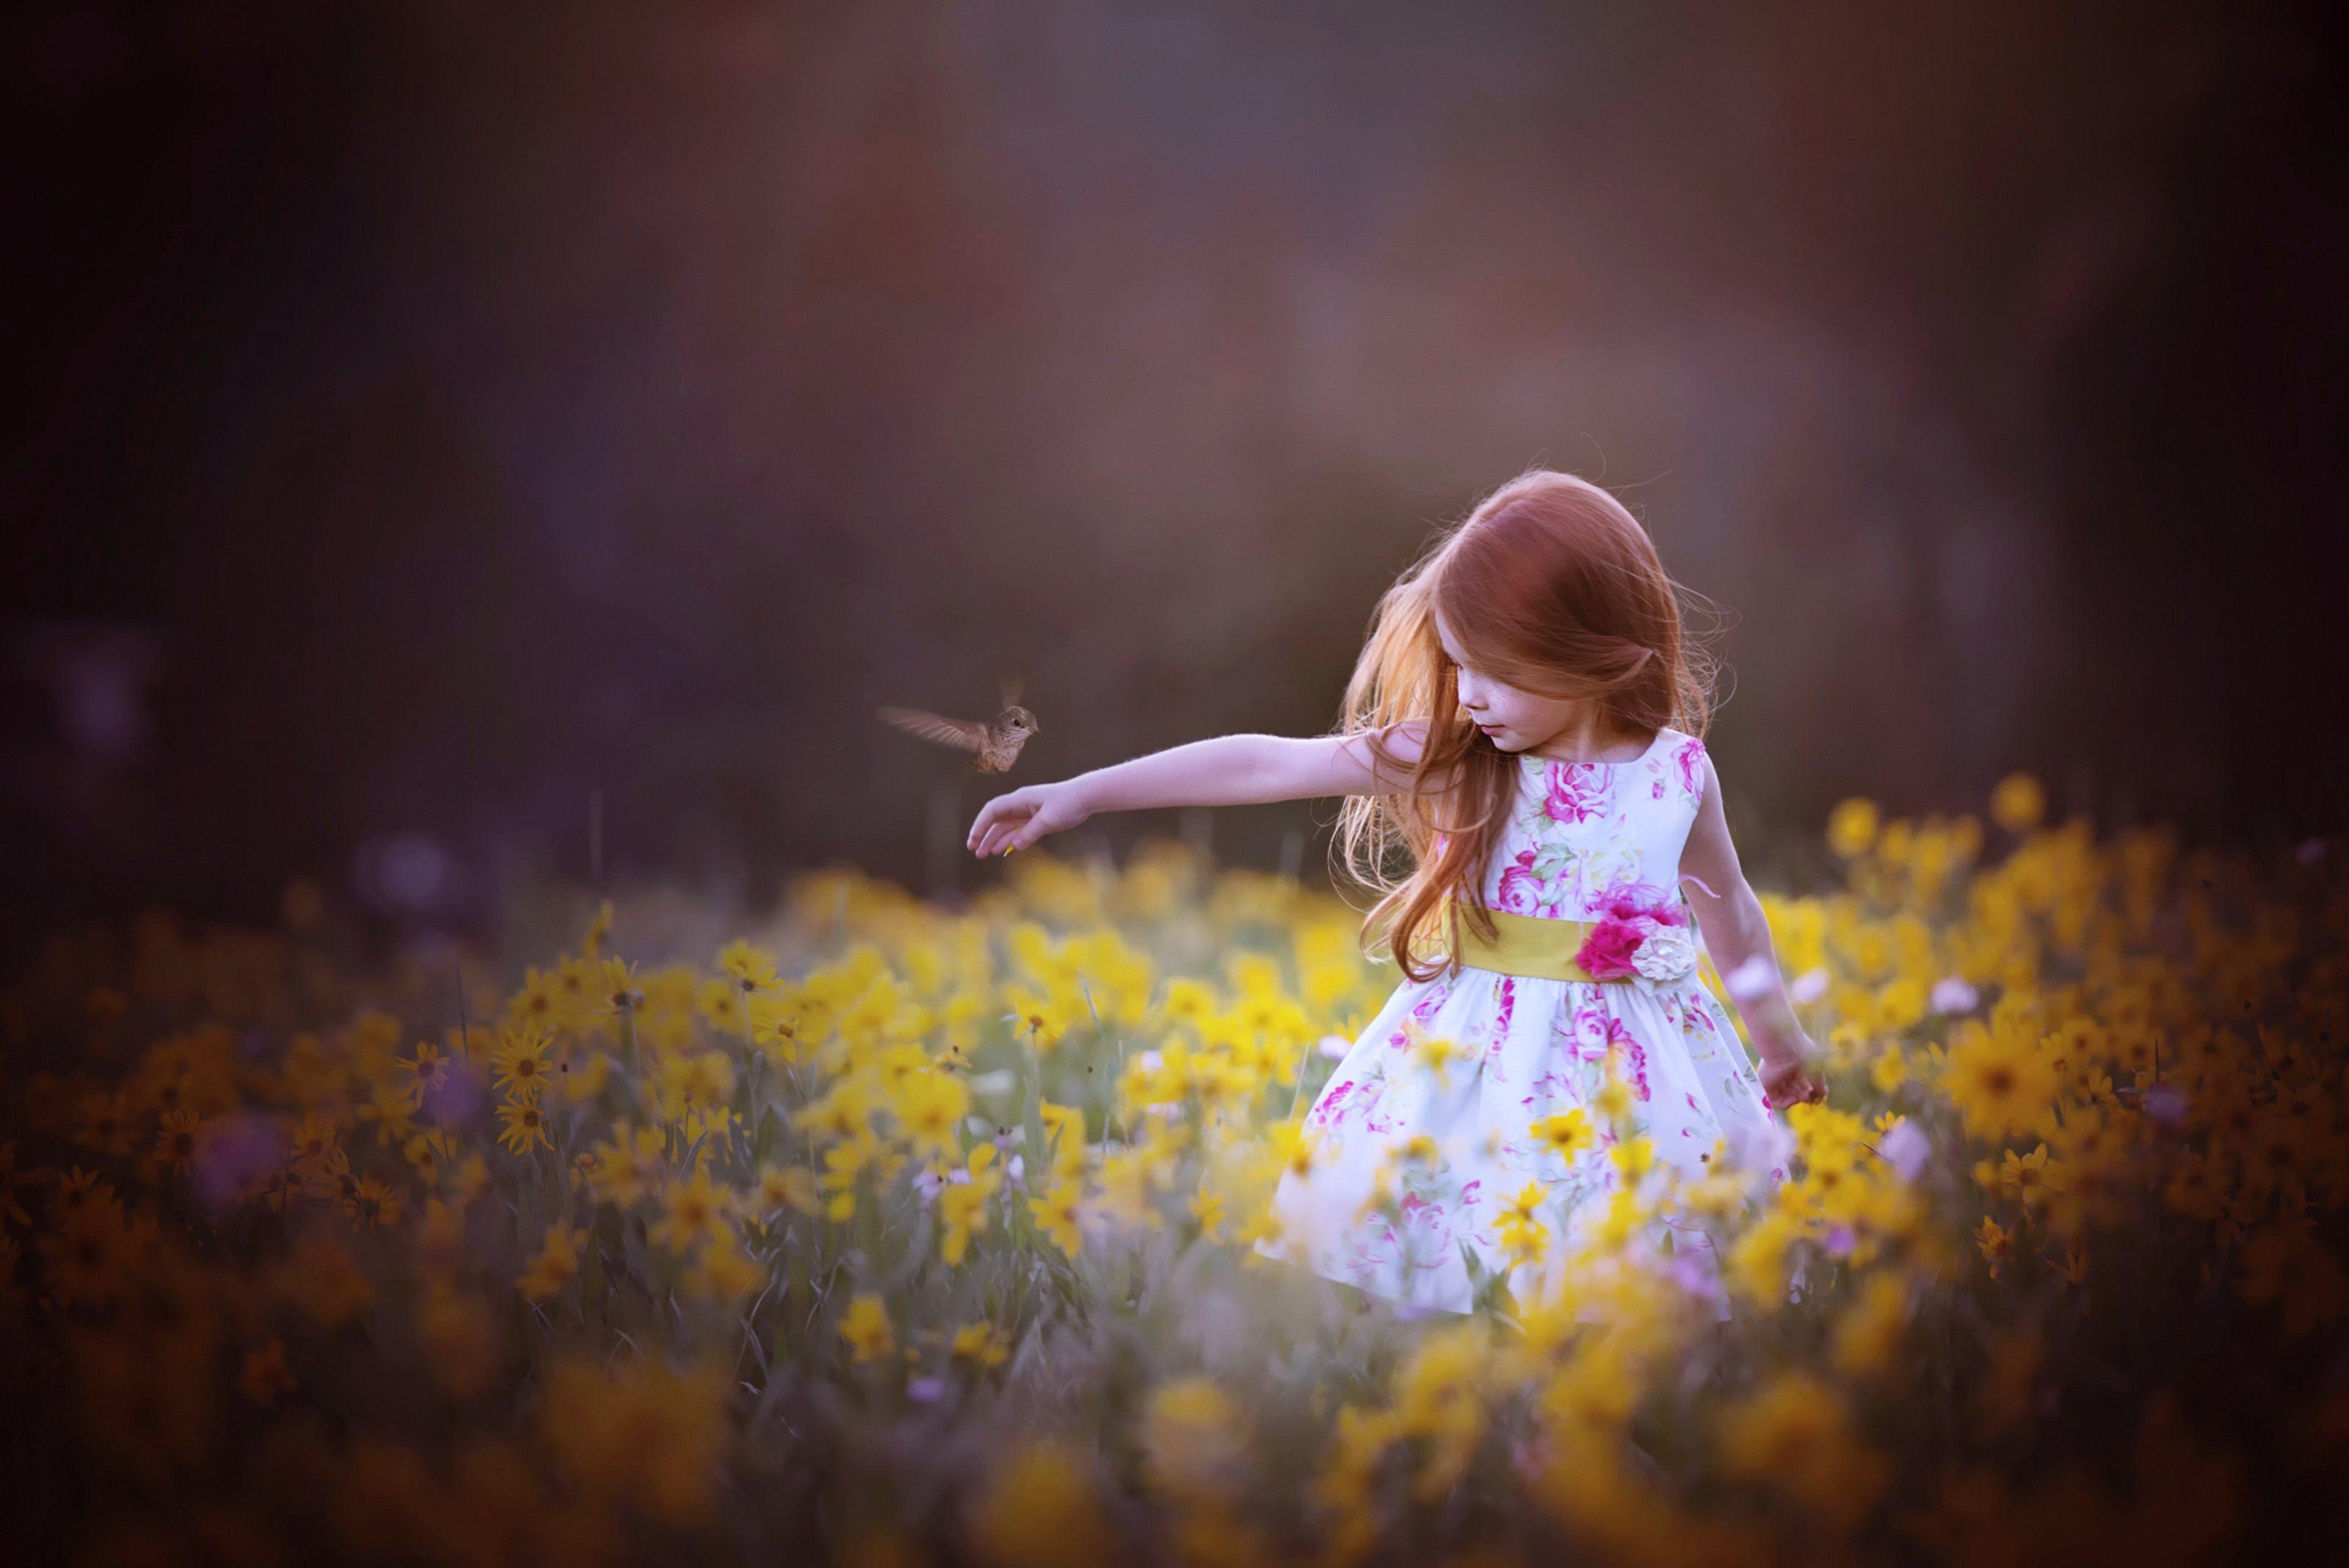 Cute Girls Nature Image Photo Little Girl In Nature Wallpaper 10